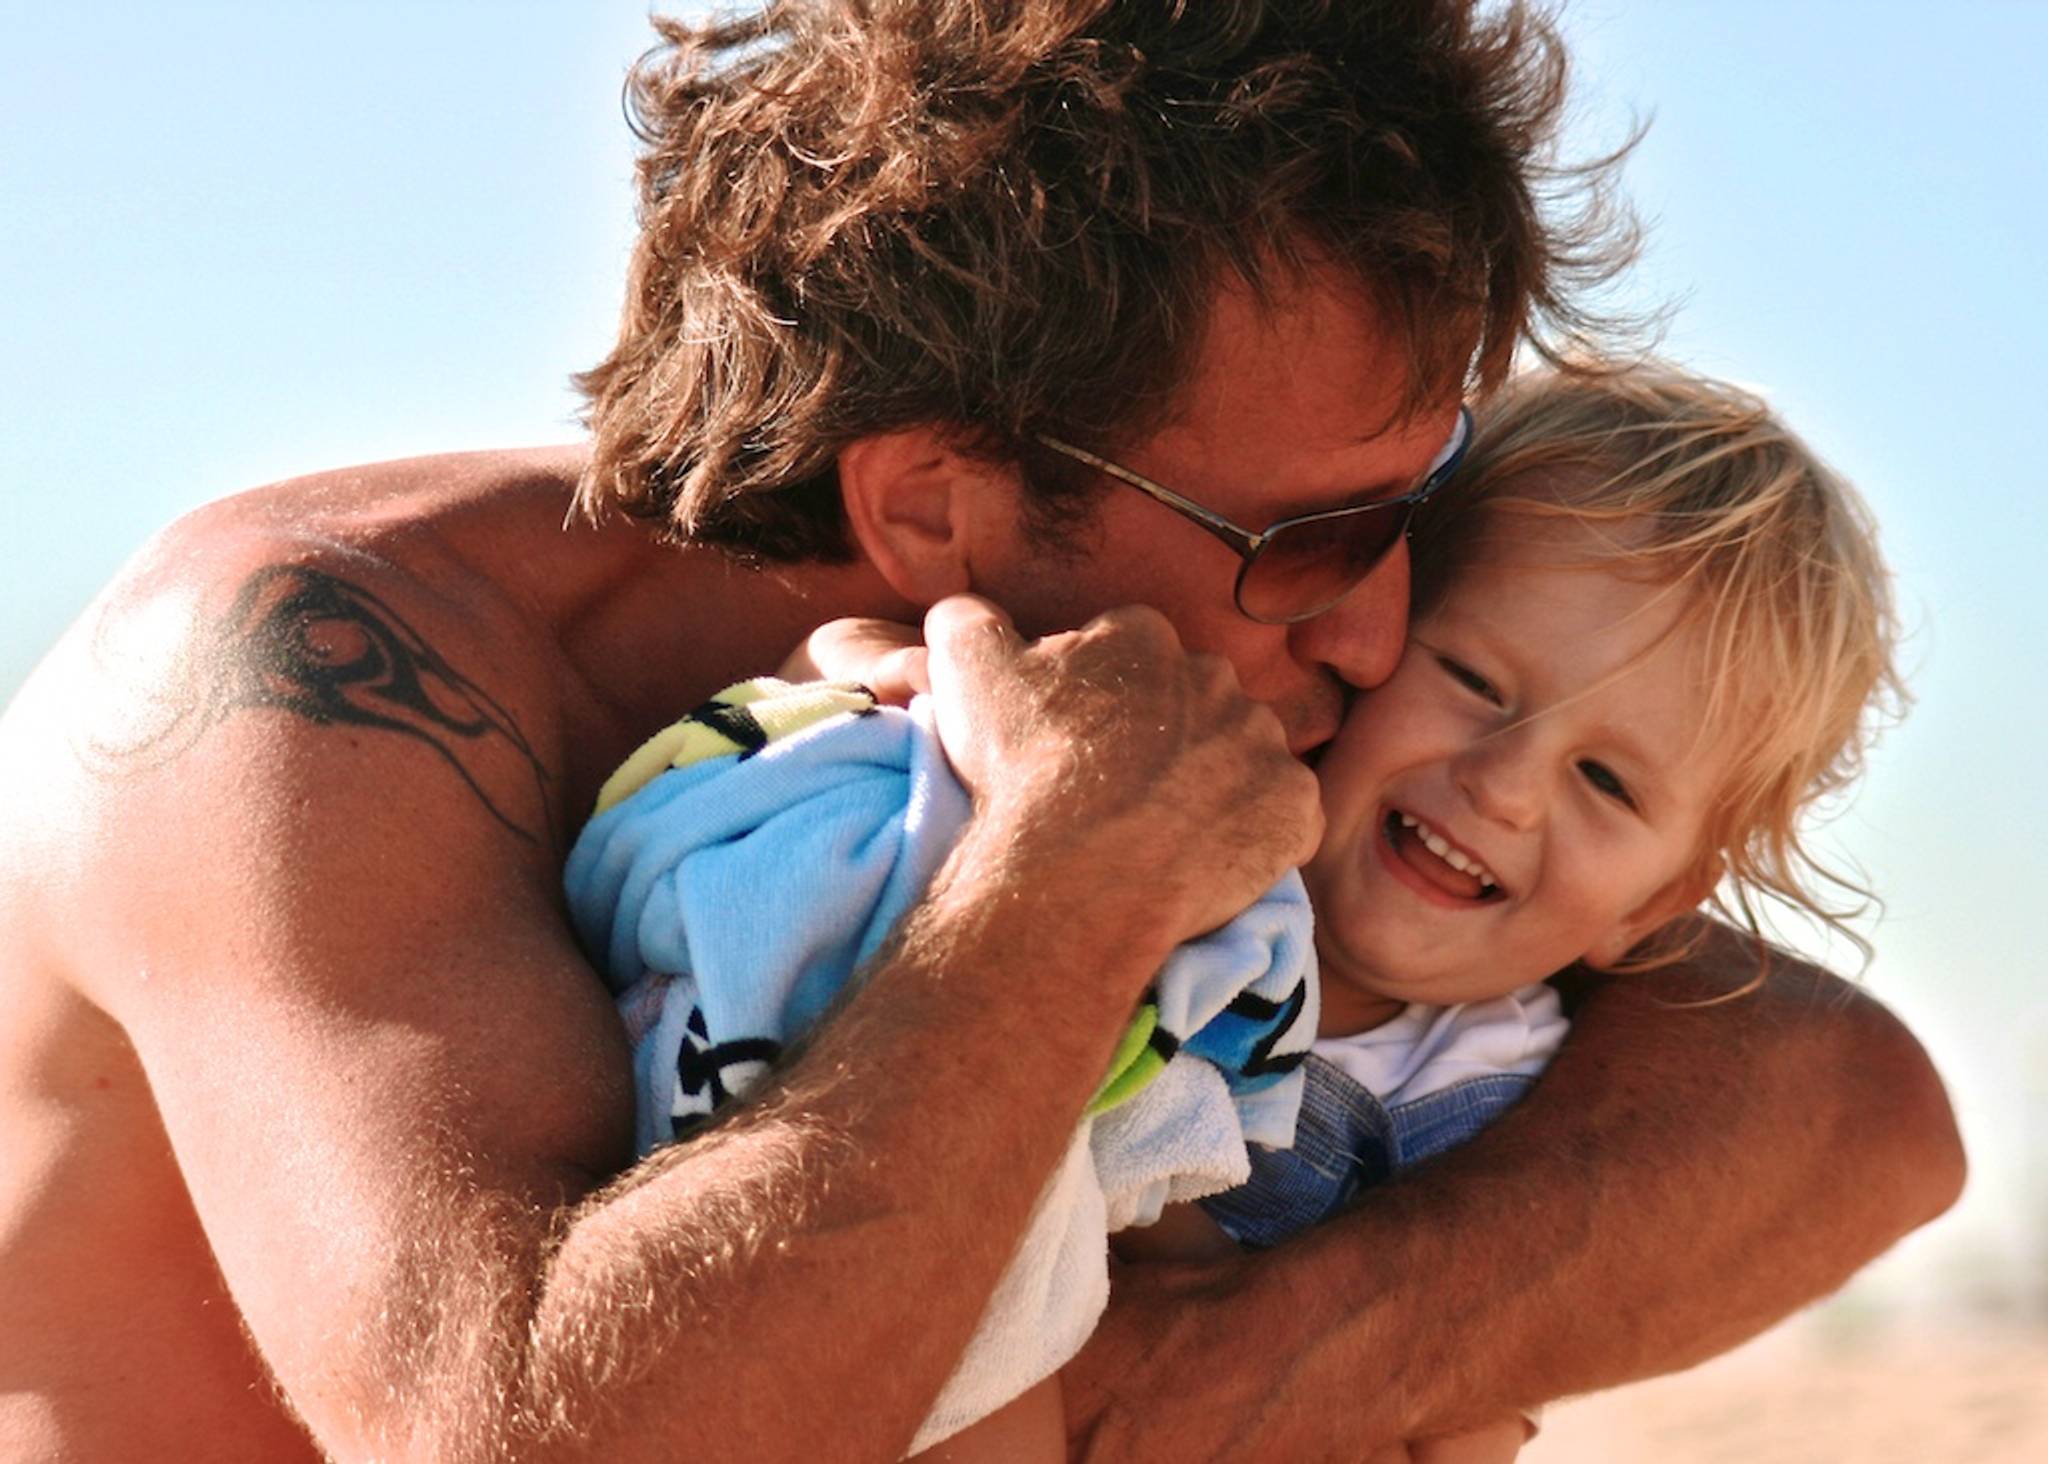 Dads have a big impact on their kids' health